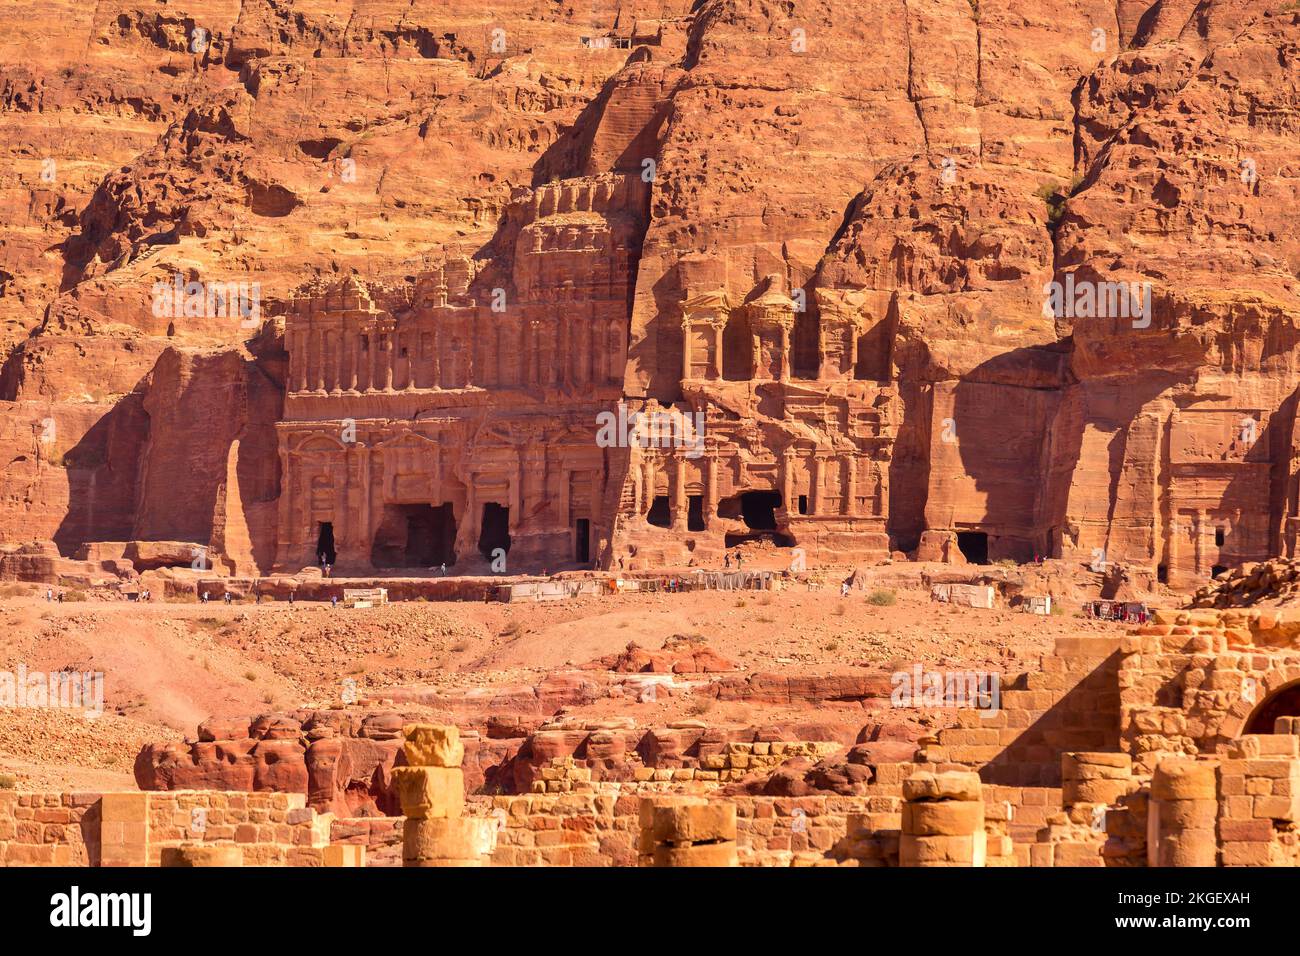 Petra, Jordan Tomb of Unayshu carved in red rock in the ancient city, aerial view Stock Photo